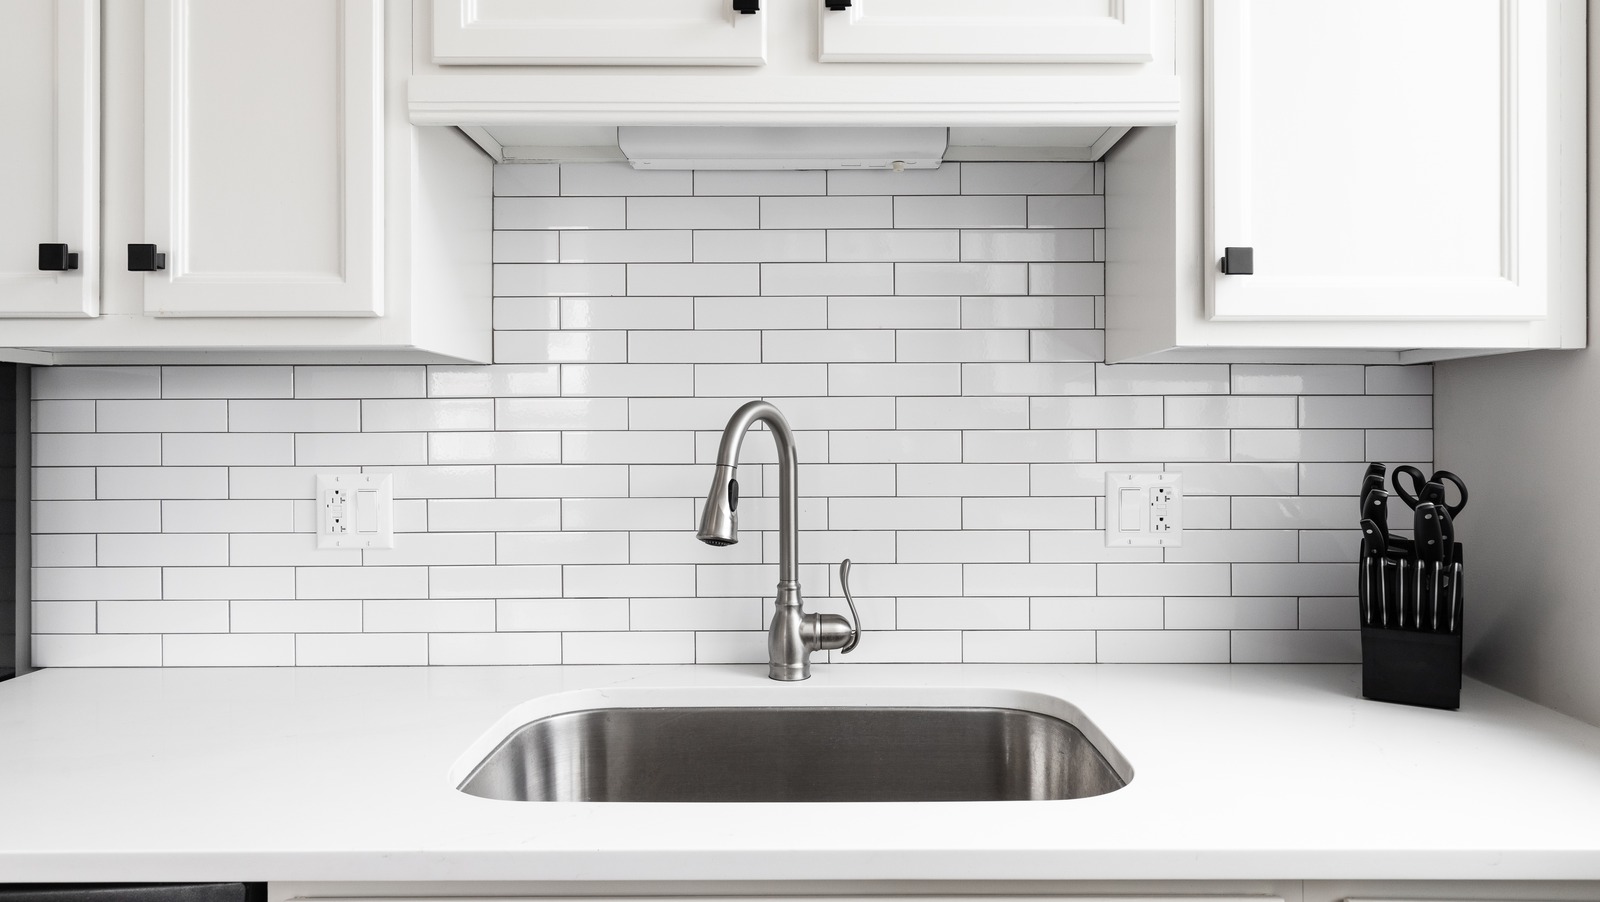 sanitizing kitchen counters and sink with bleach